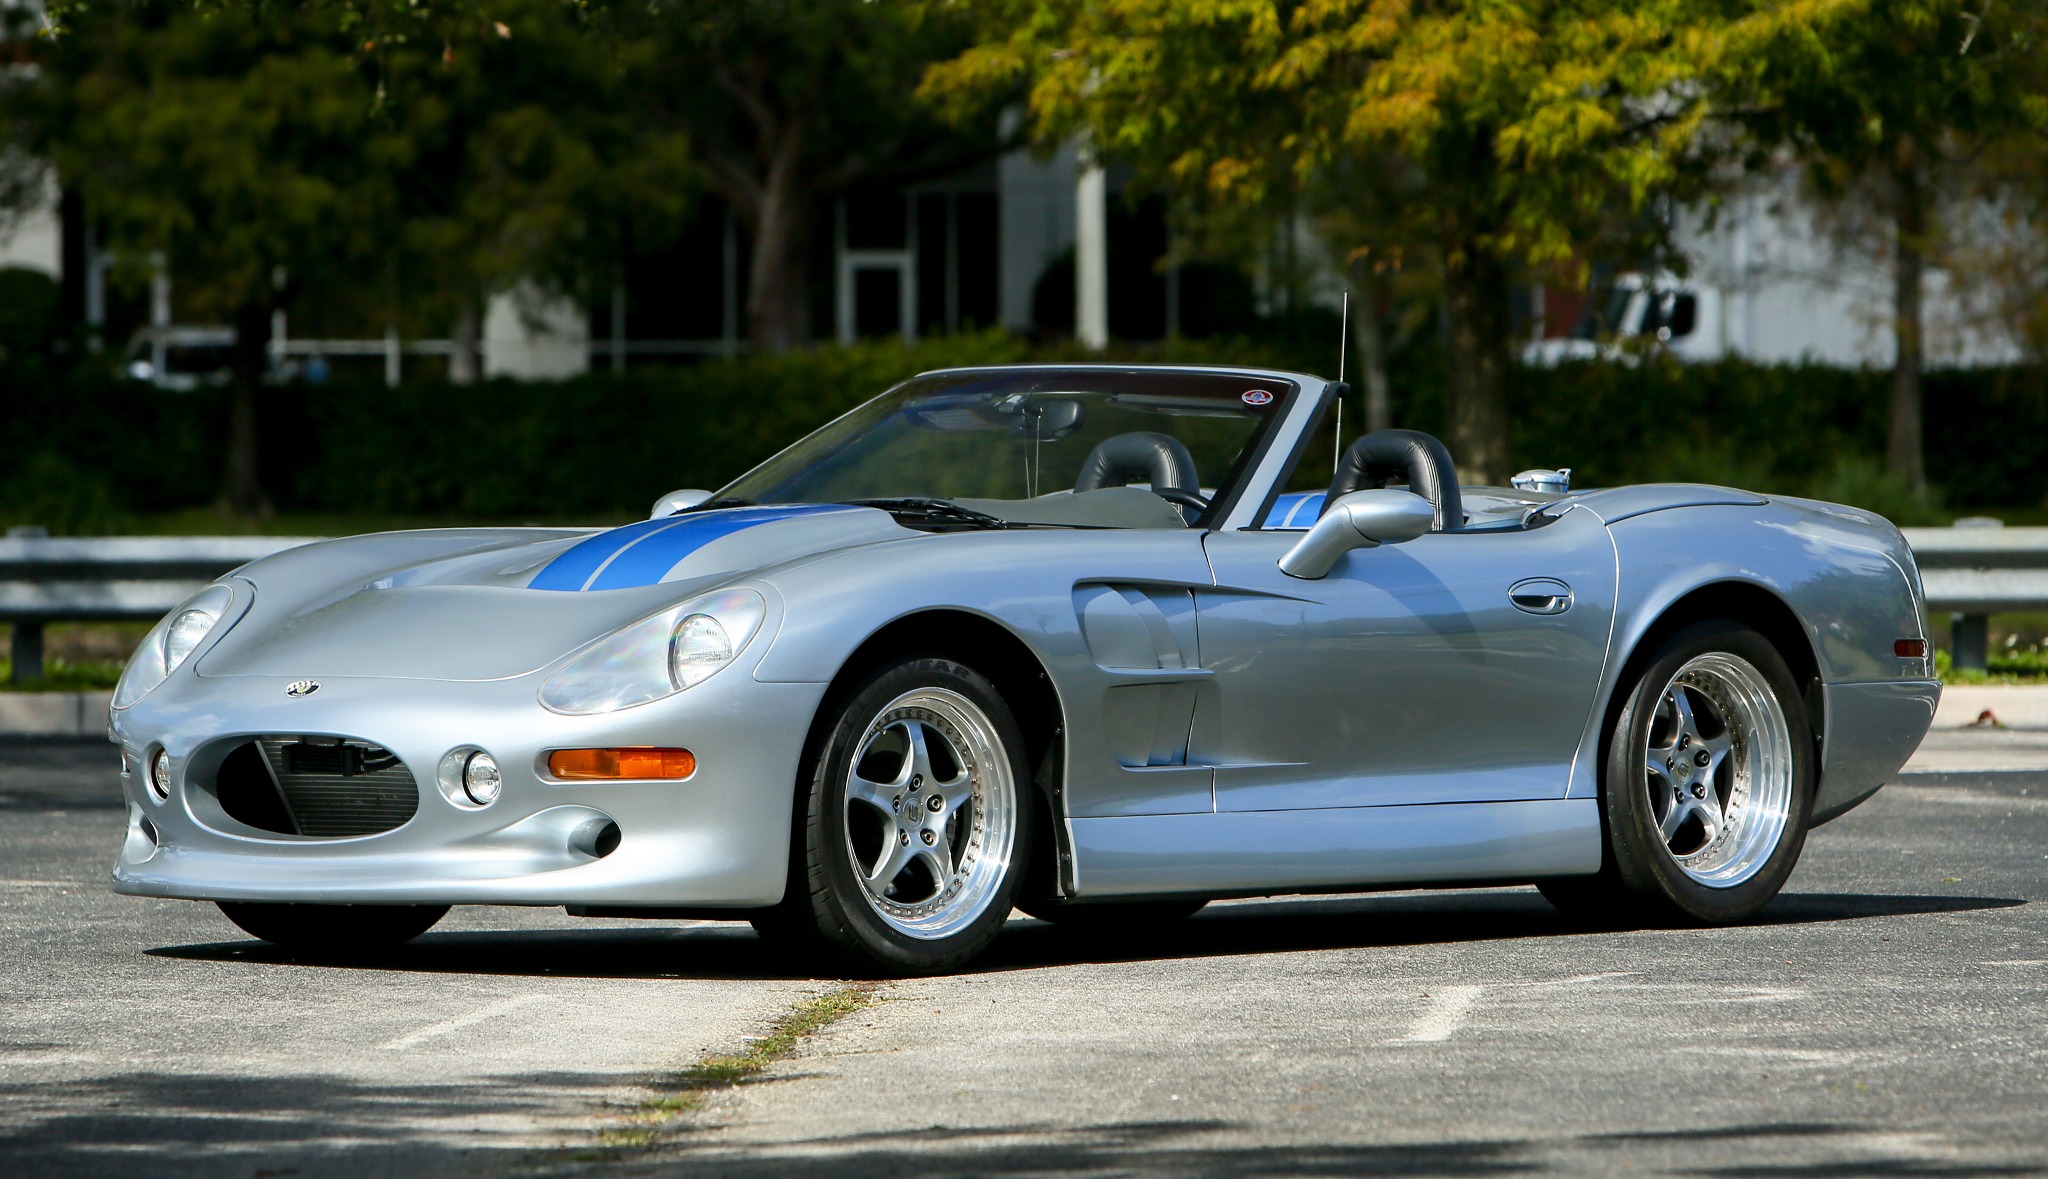 Shelby Series One sports car Ryan Merrill Sotheby's